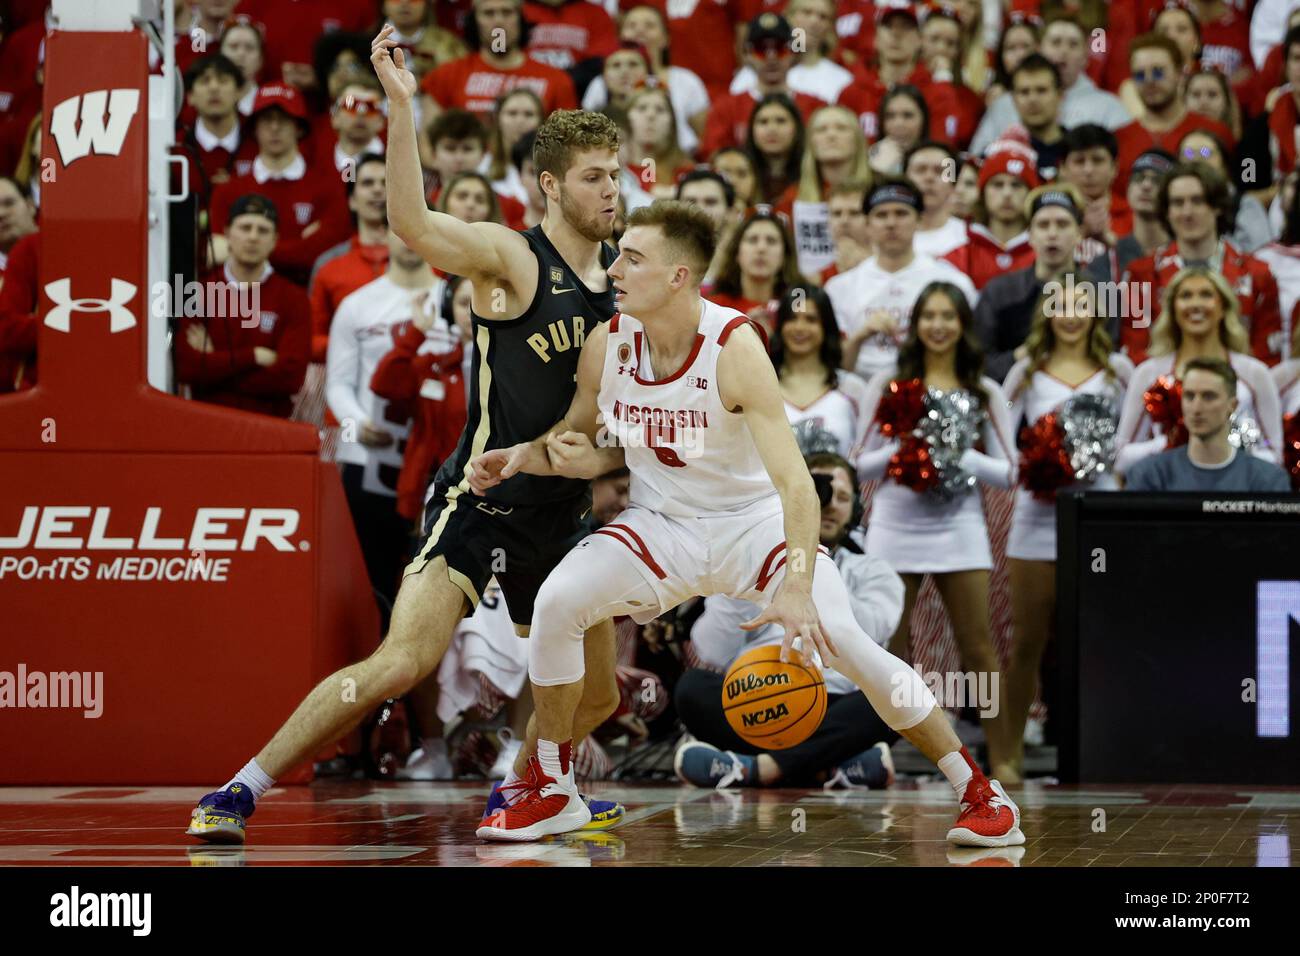 Madison, WI, USA. 2nd Mar, 2023. Wisconsin Badgers forward Tyler Wahl (5)  posts up during the NCAA basketball game between the Purdue Boilermakers  and the Wisconsin Badgers at the Kohl Center in